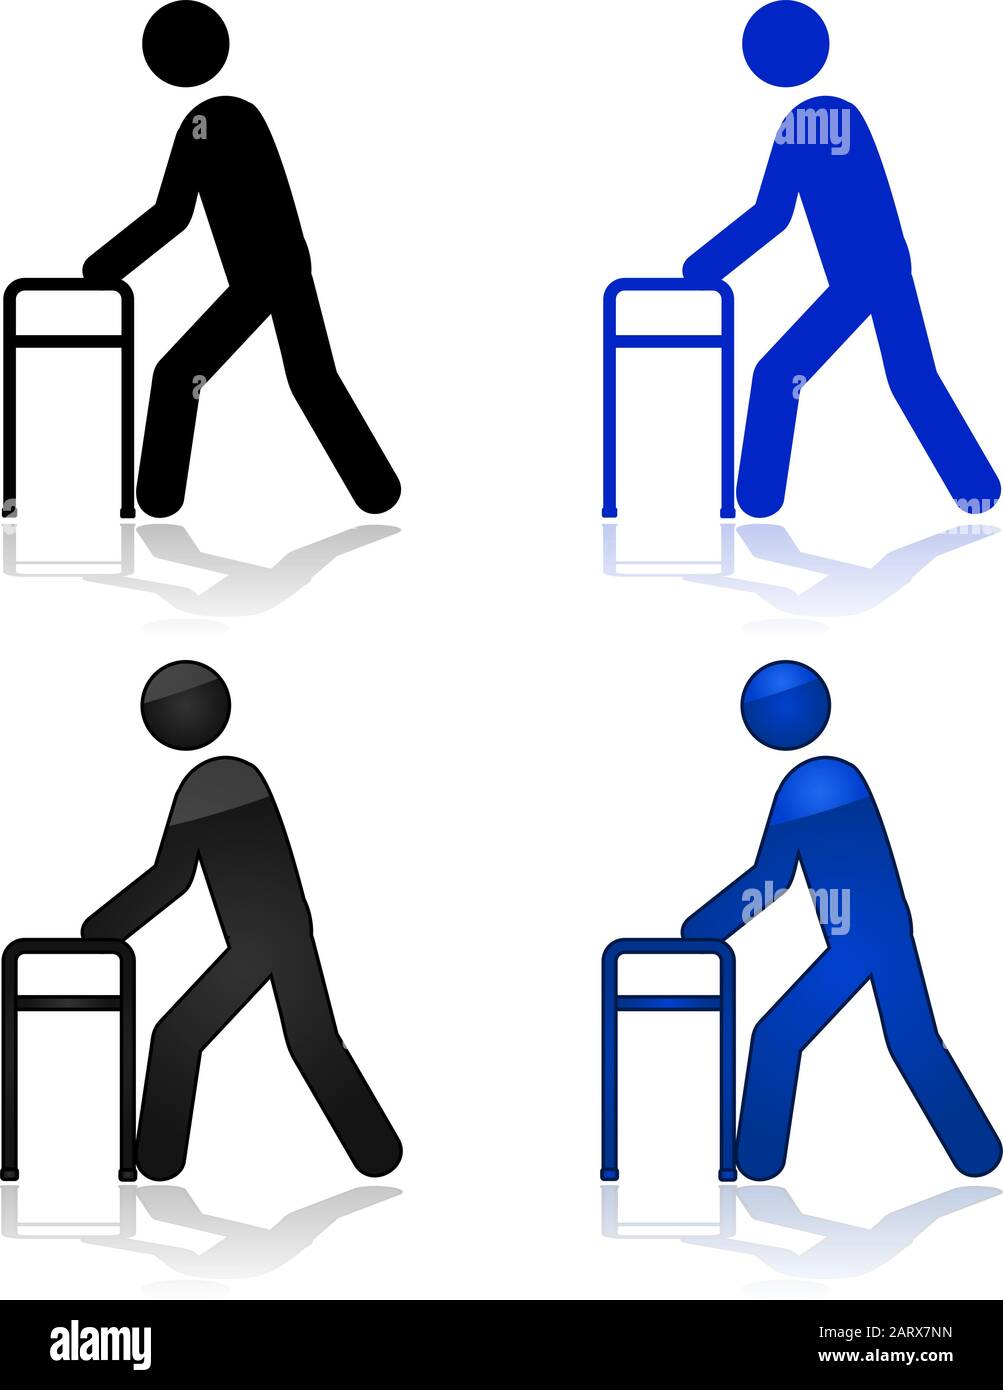 Icon illustration showing a person using a walking aid Stock Vector